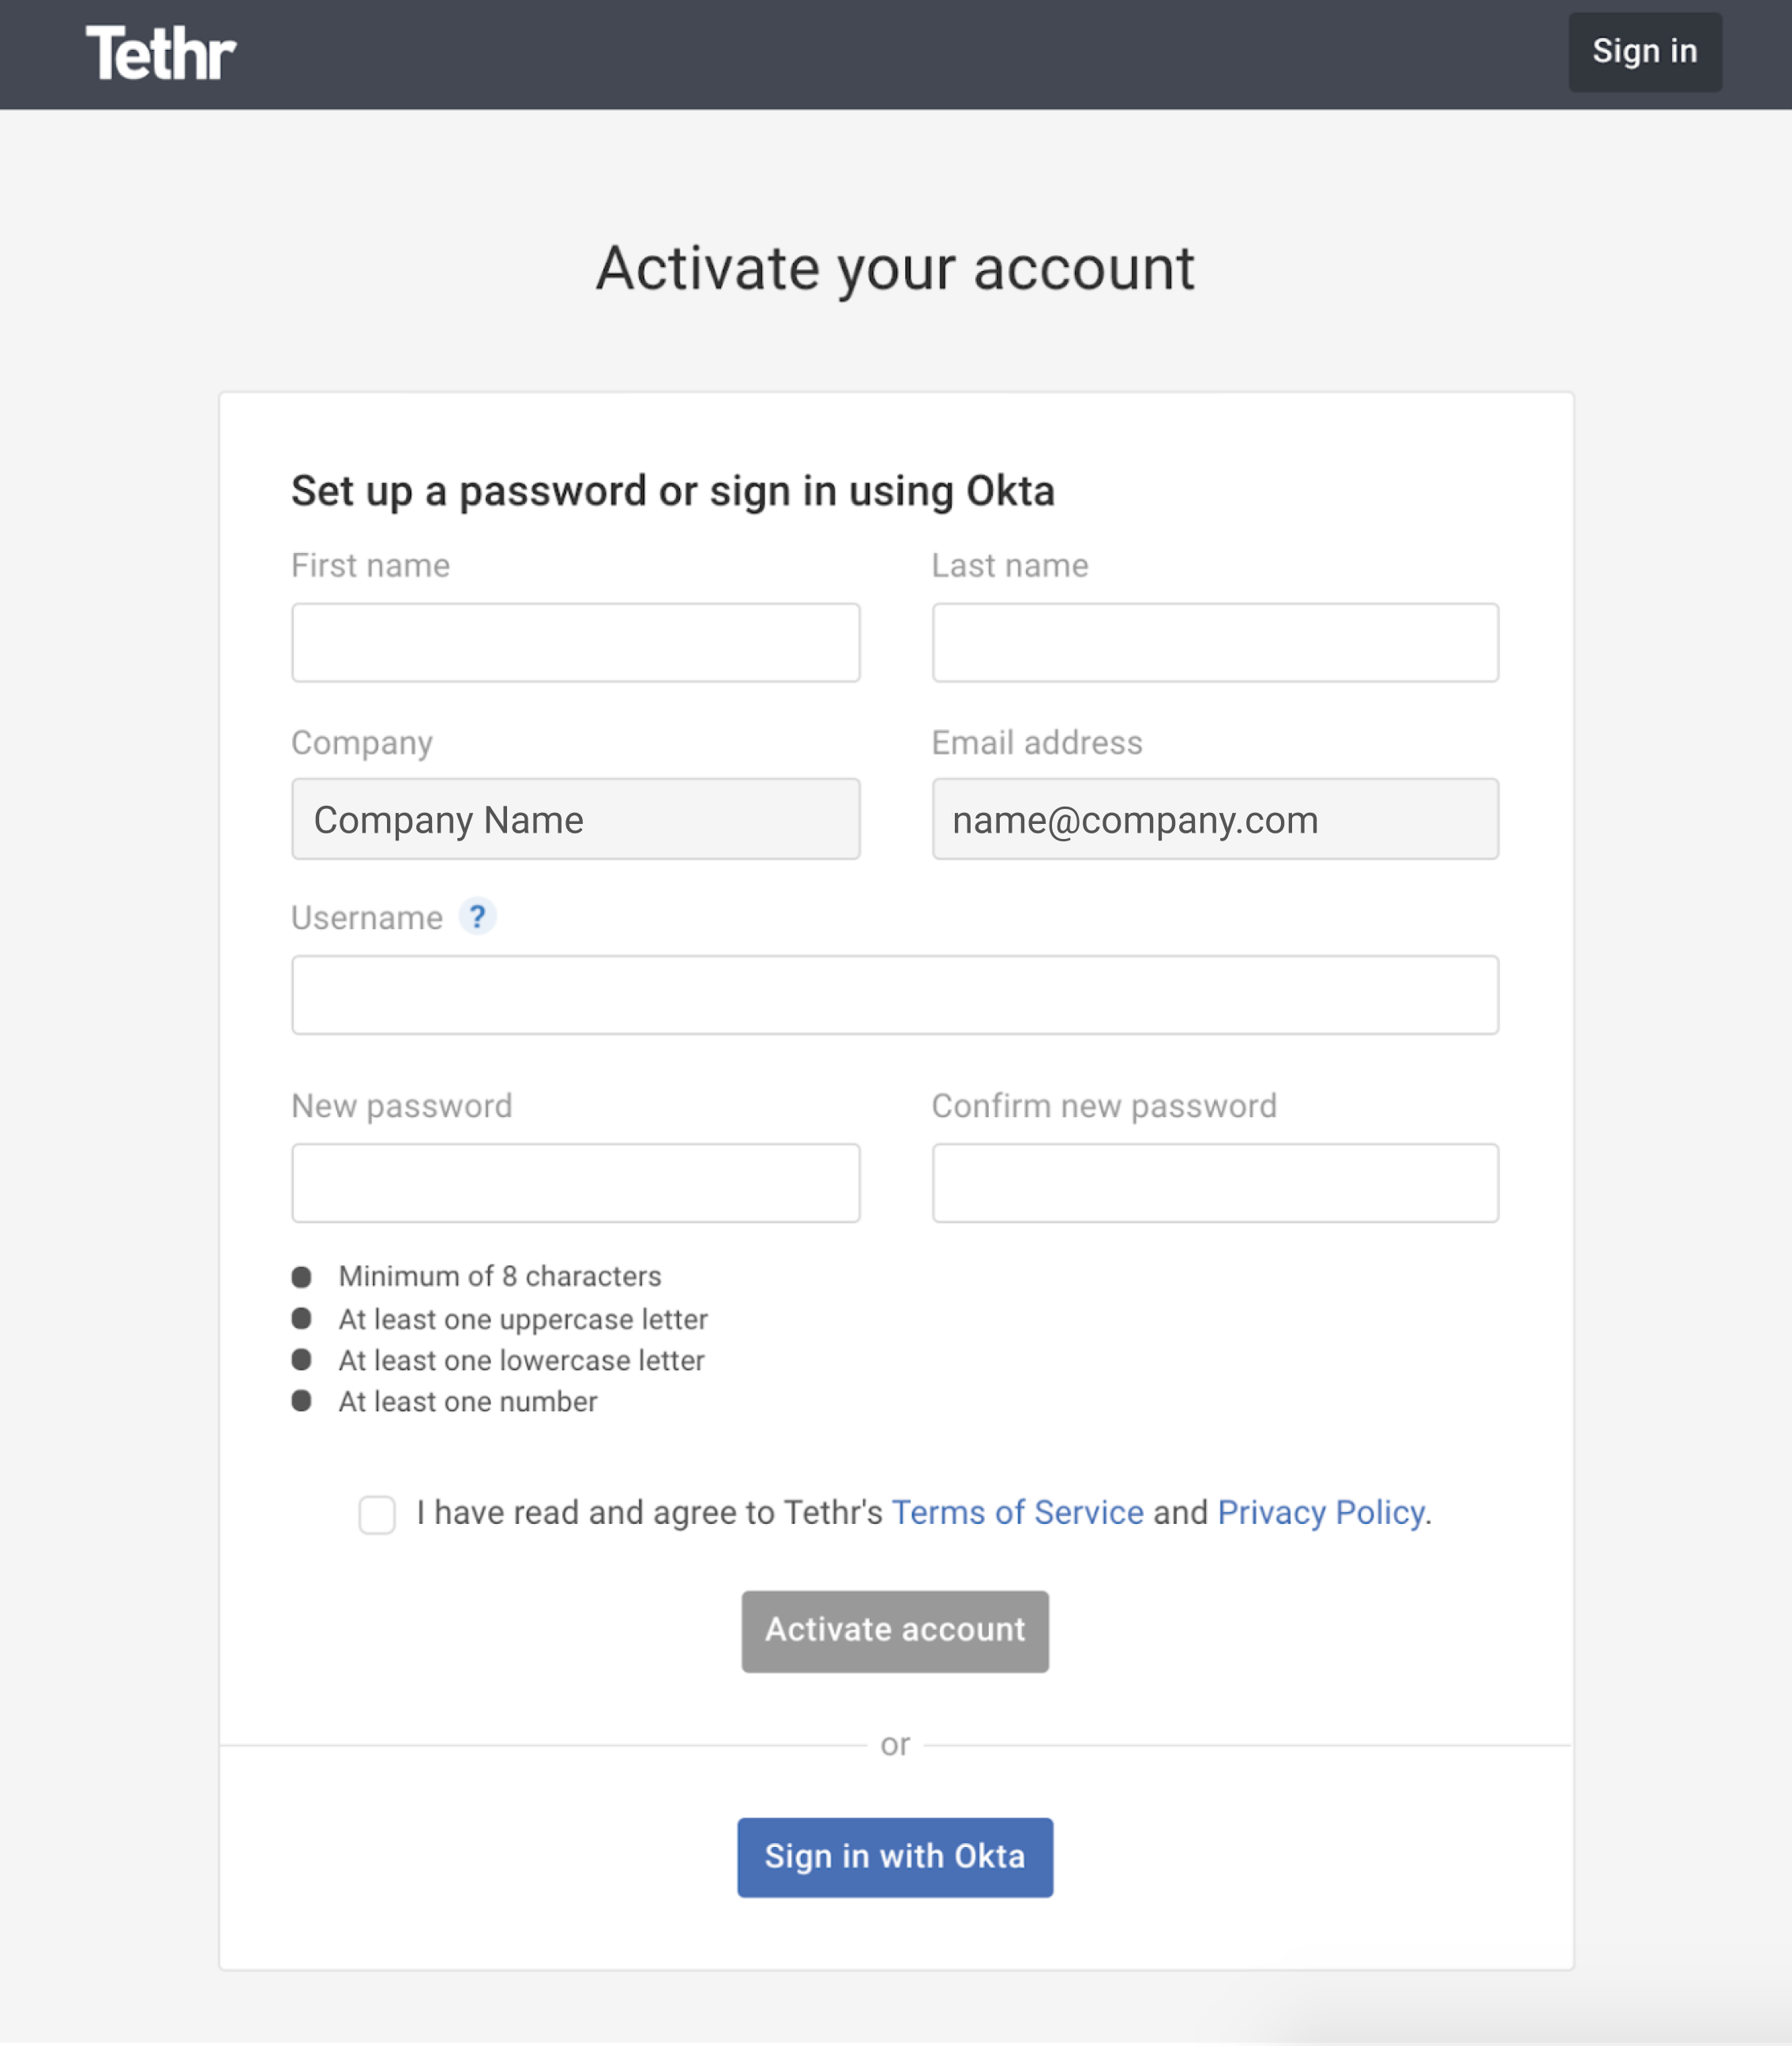 Tethr_activate_your_account_sign-in_with_Okta_SSO.png